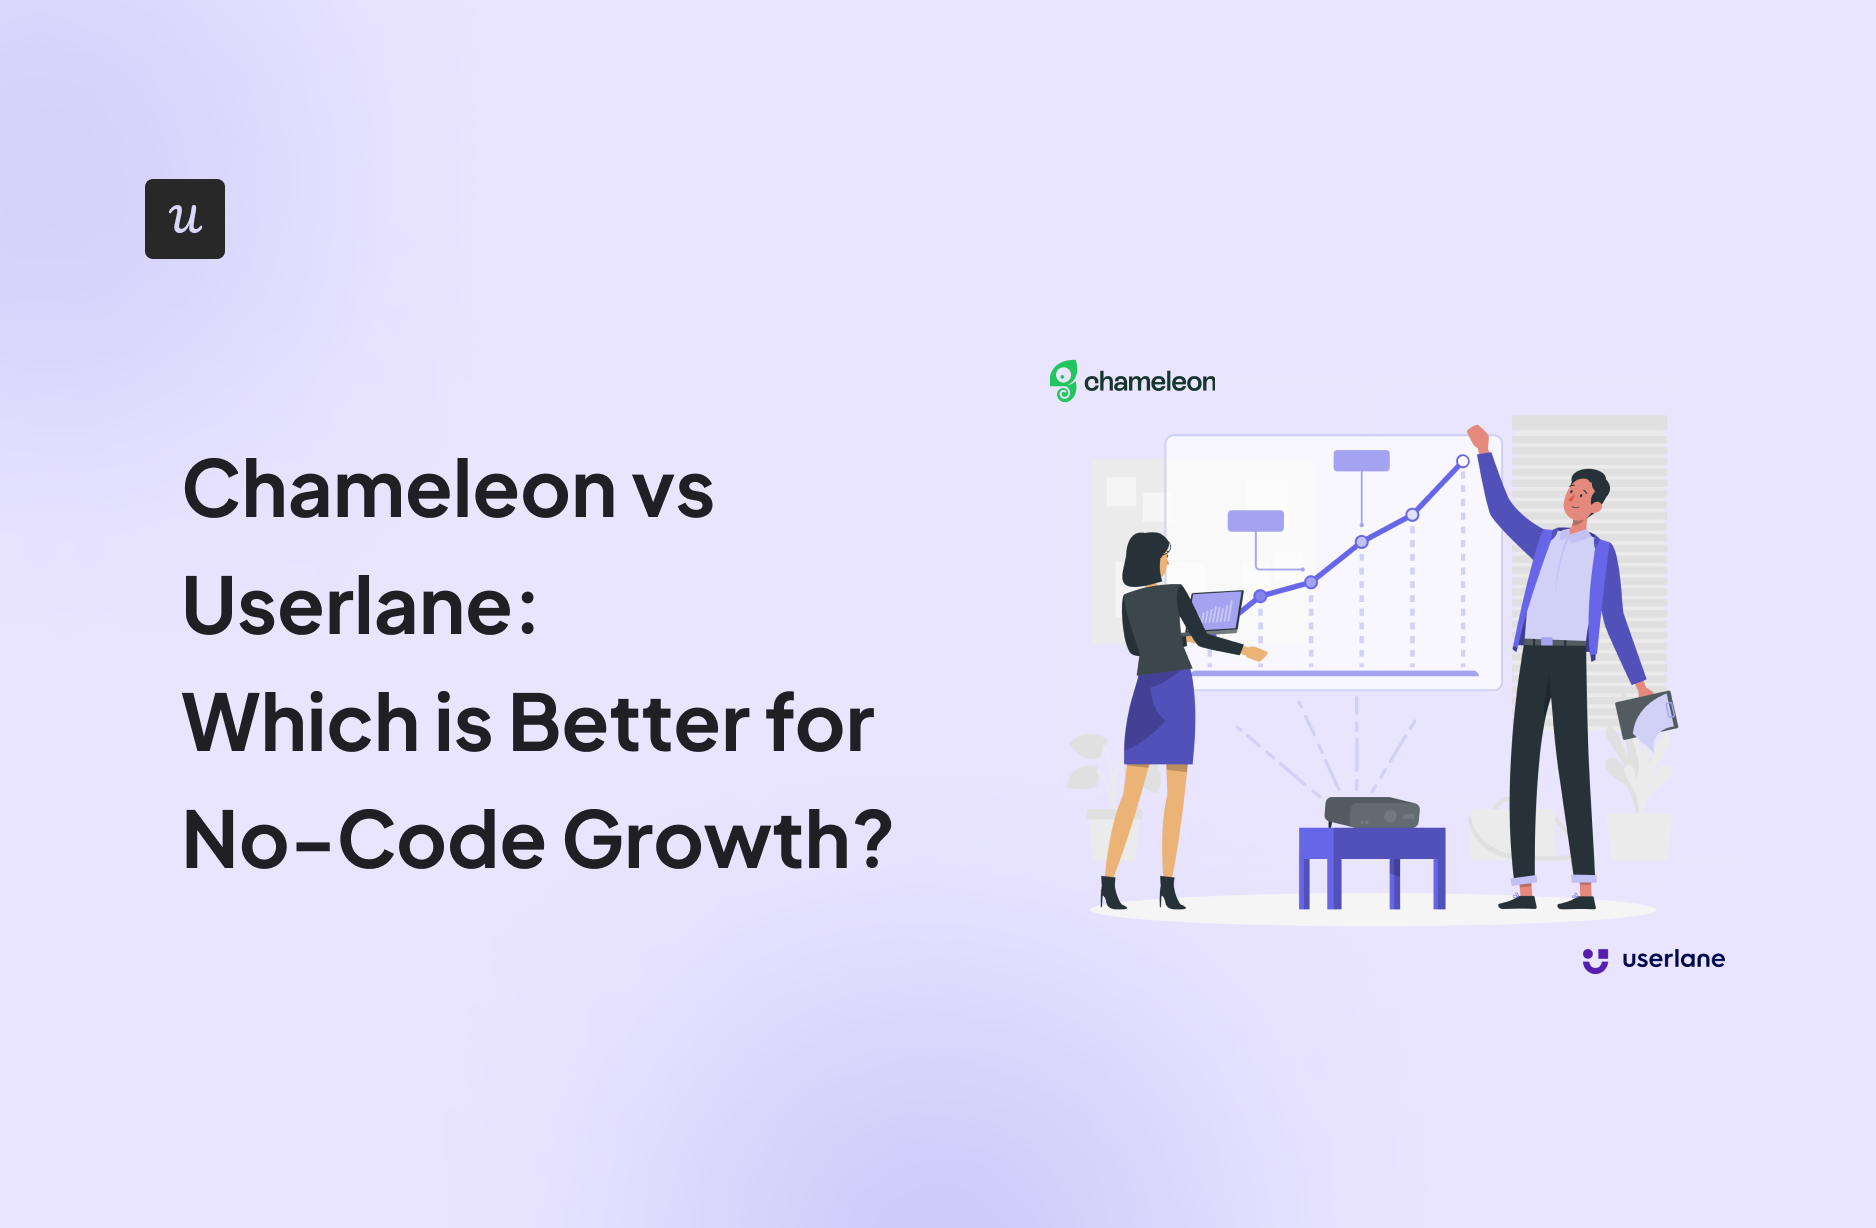 Chameleon vs Userlane: Which is Better for No-Code Growth?